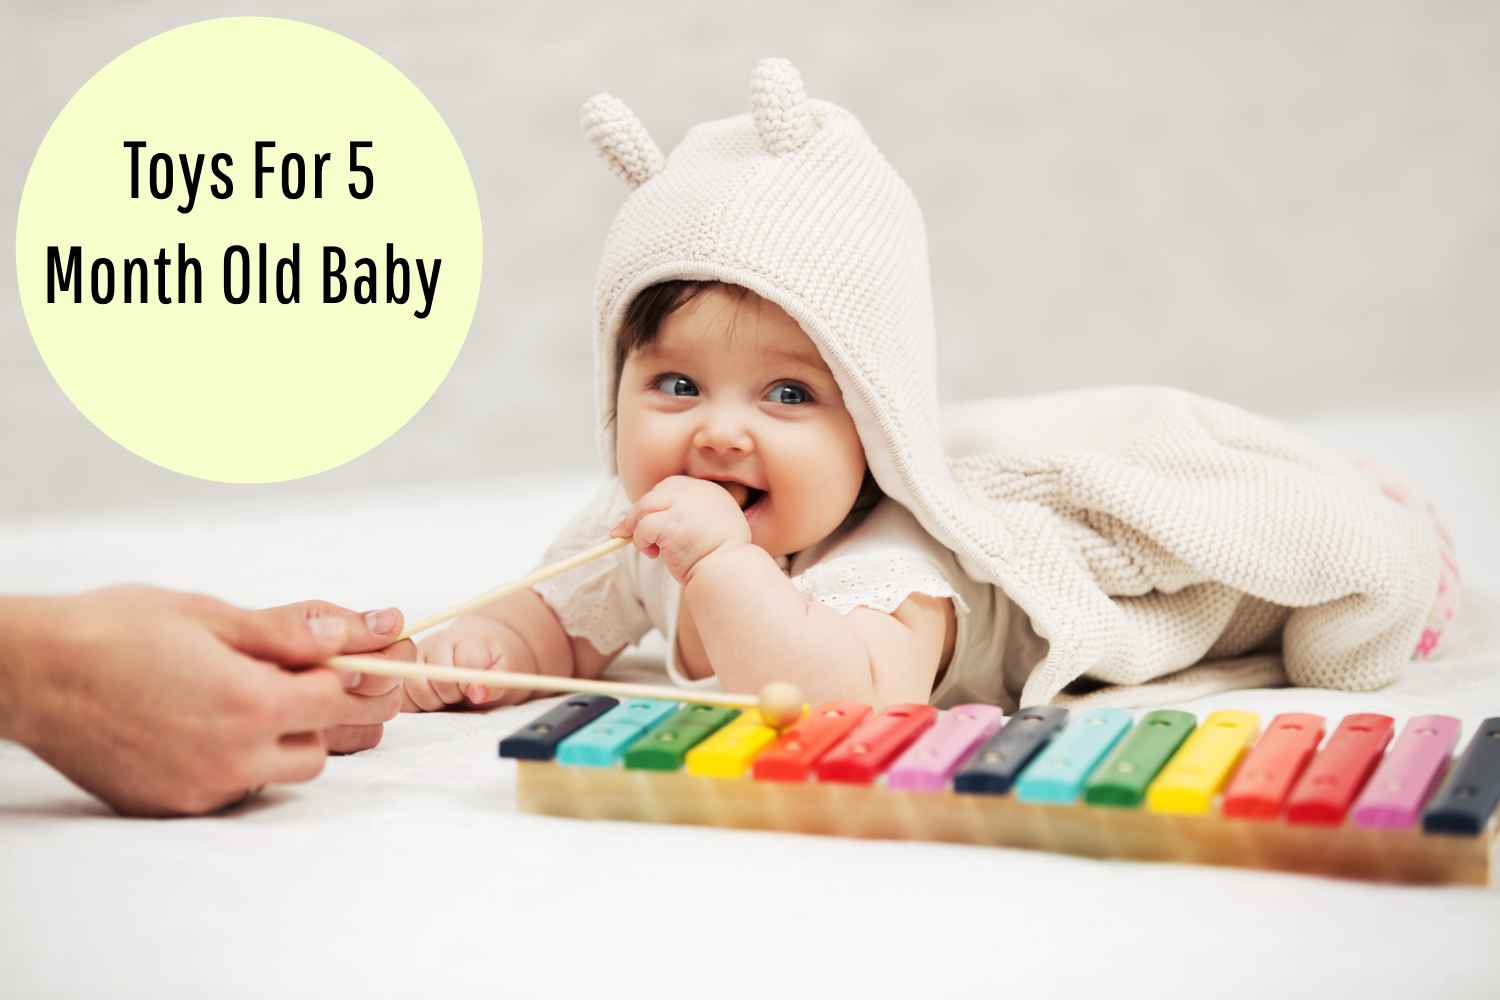 Toys For 5 Month Old Baby – Types, Benefits and What to Buy